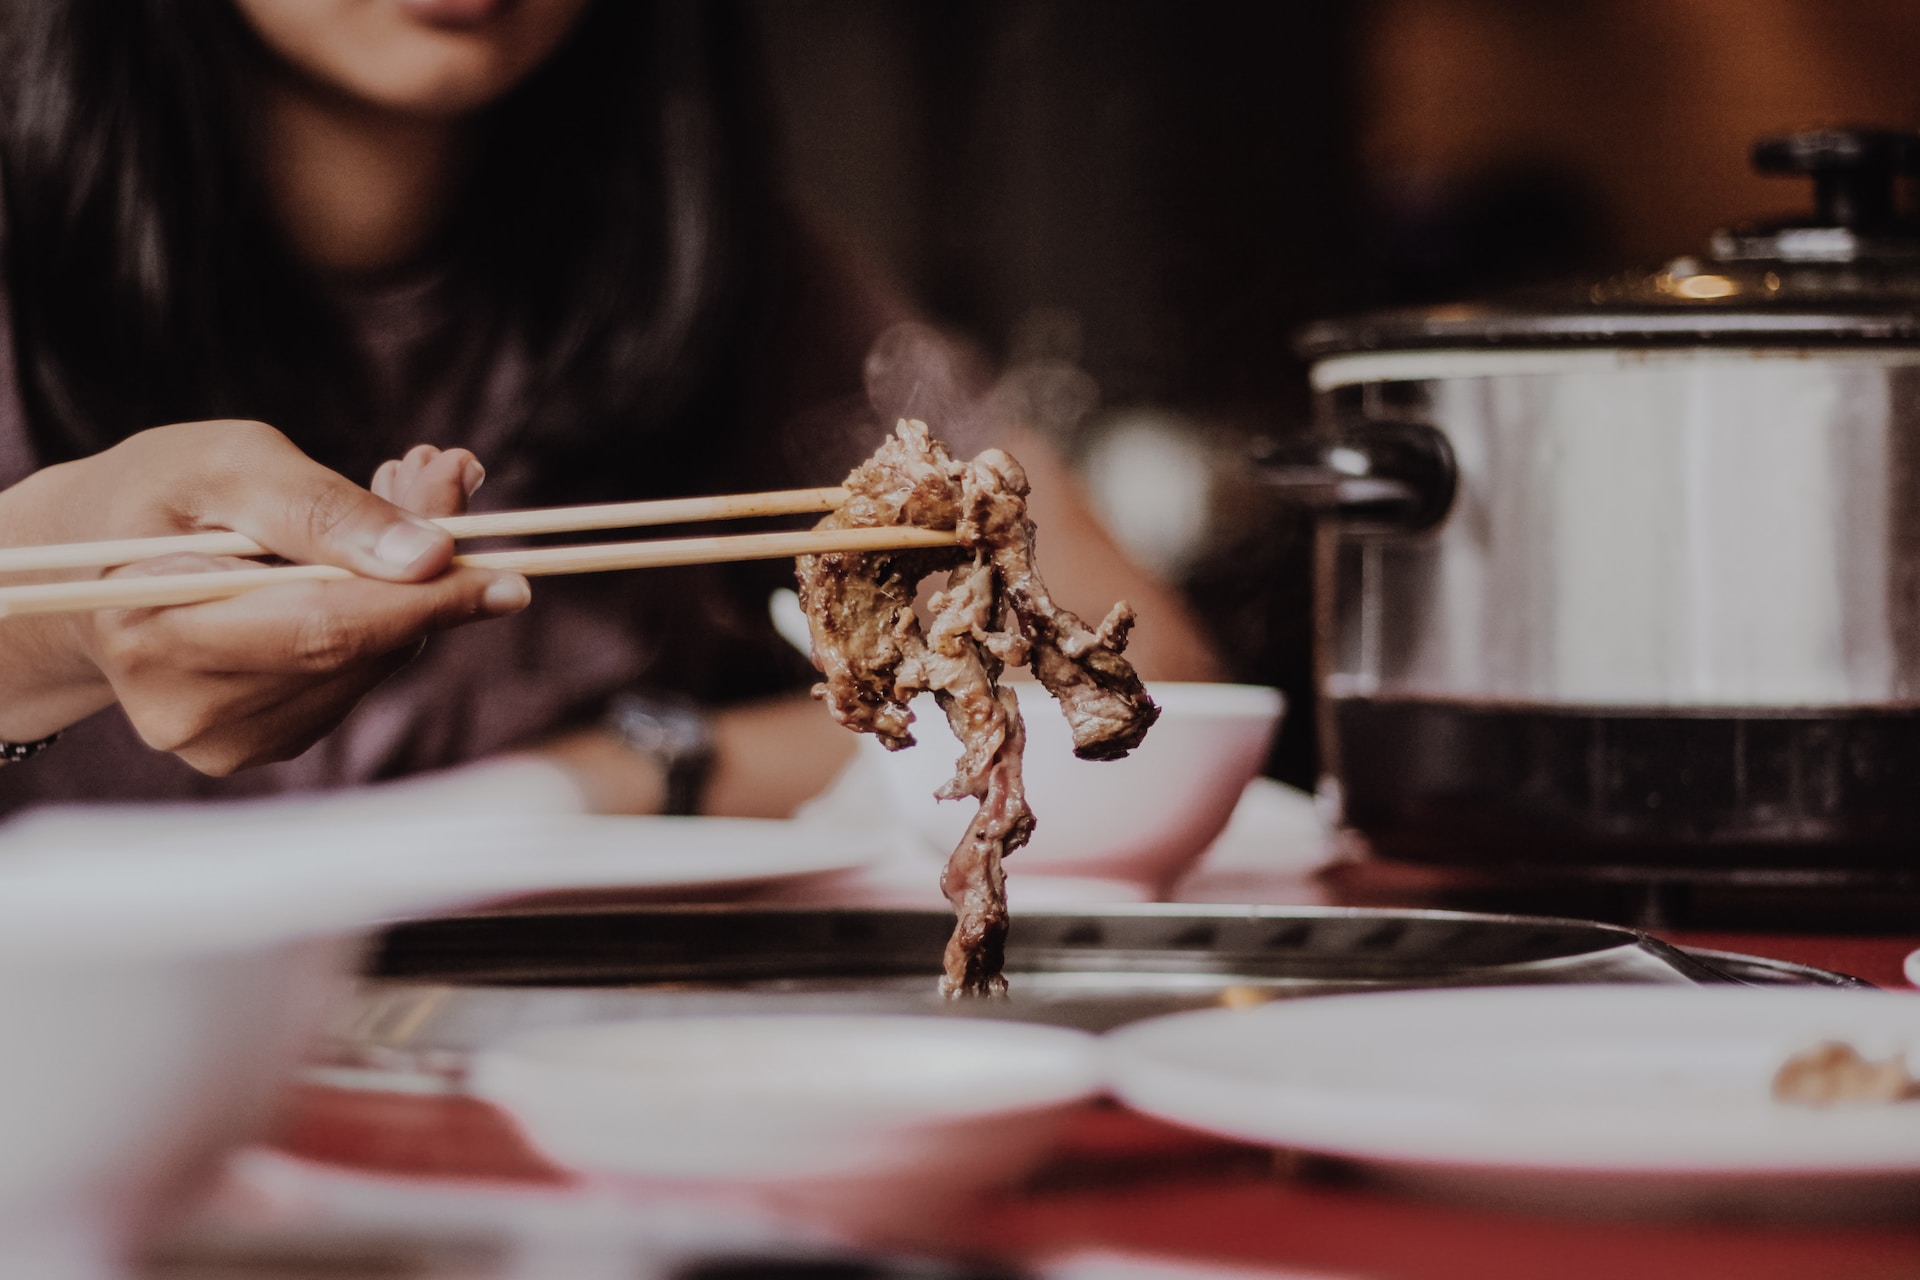 Learning how to use chopsticks can help you avoid some common taboos.